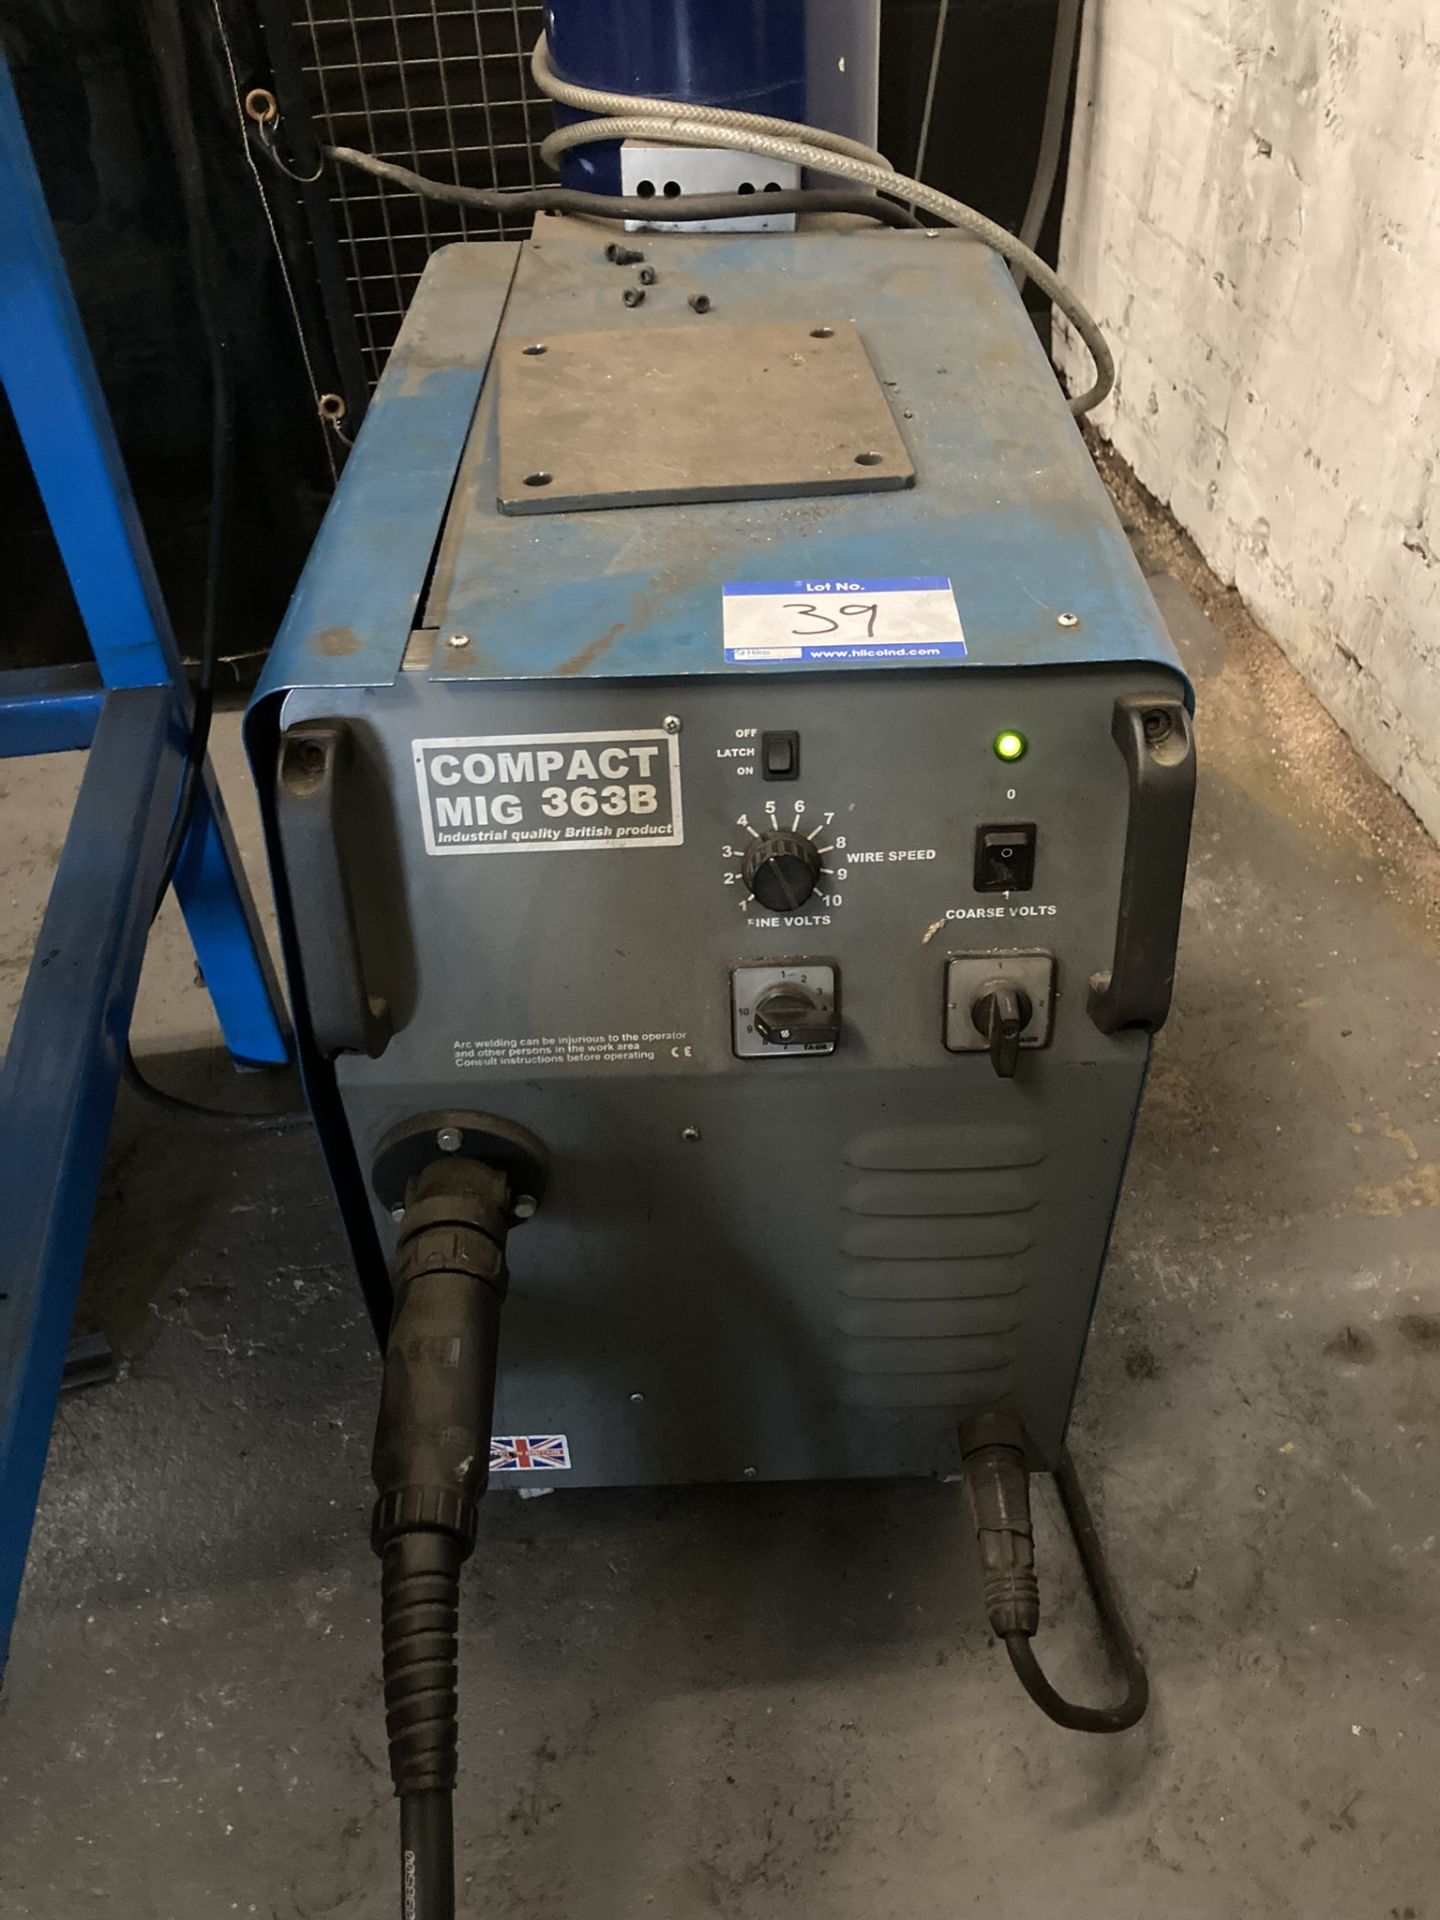 Tecarc Compact Mig 363B Mig Welder with Cables (Bottle Not Included)